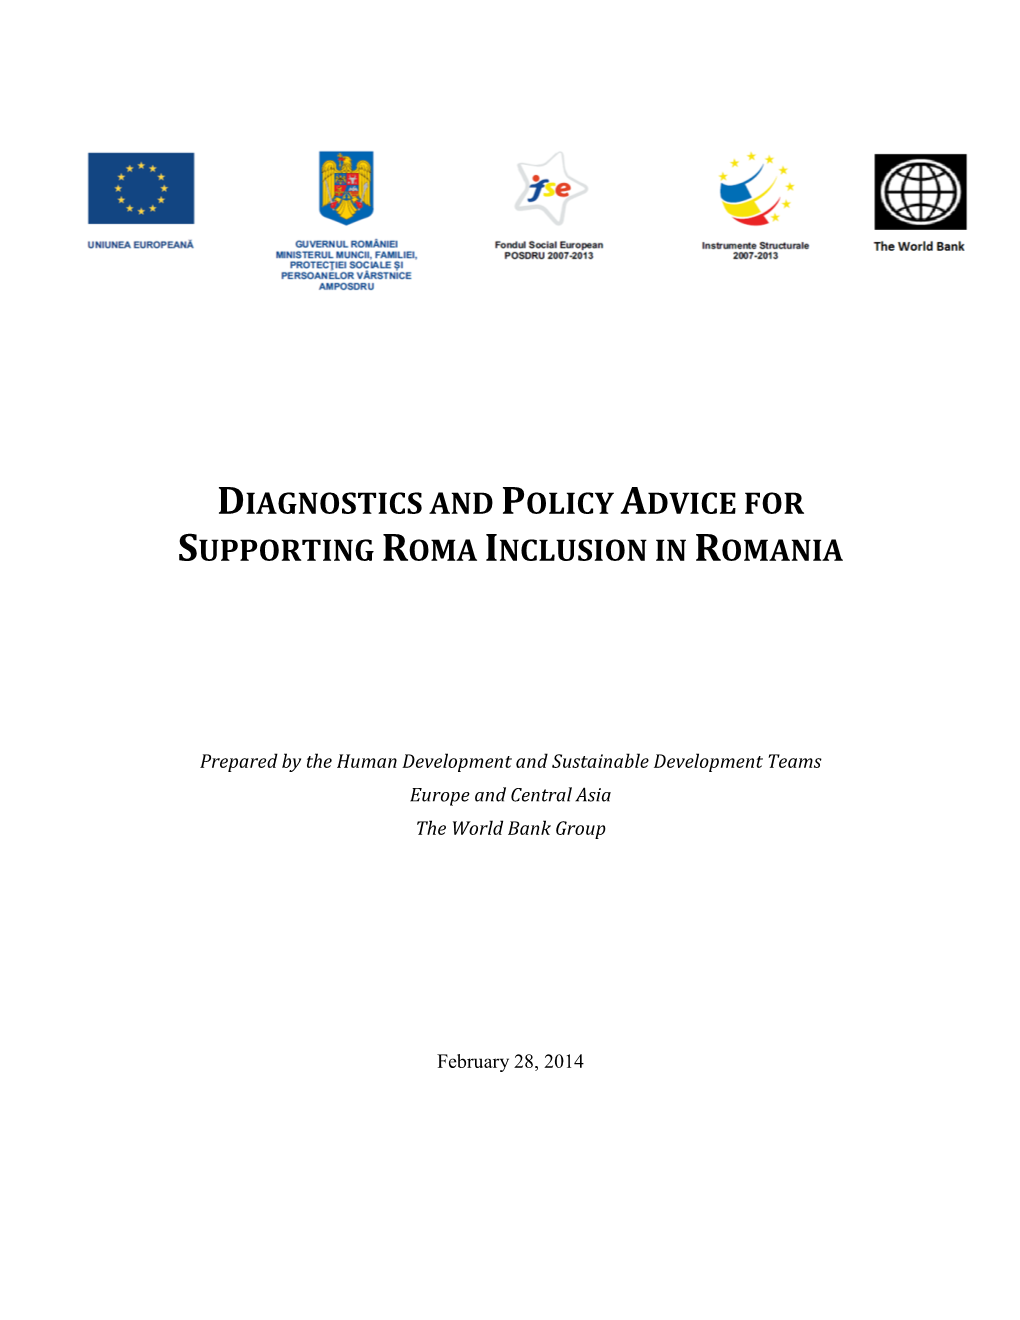 The Diagnostics and Policy Advice for Supporting Roma Inclusion In